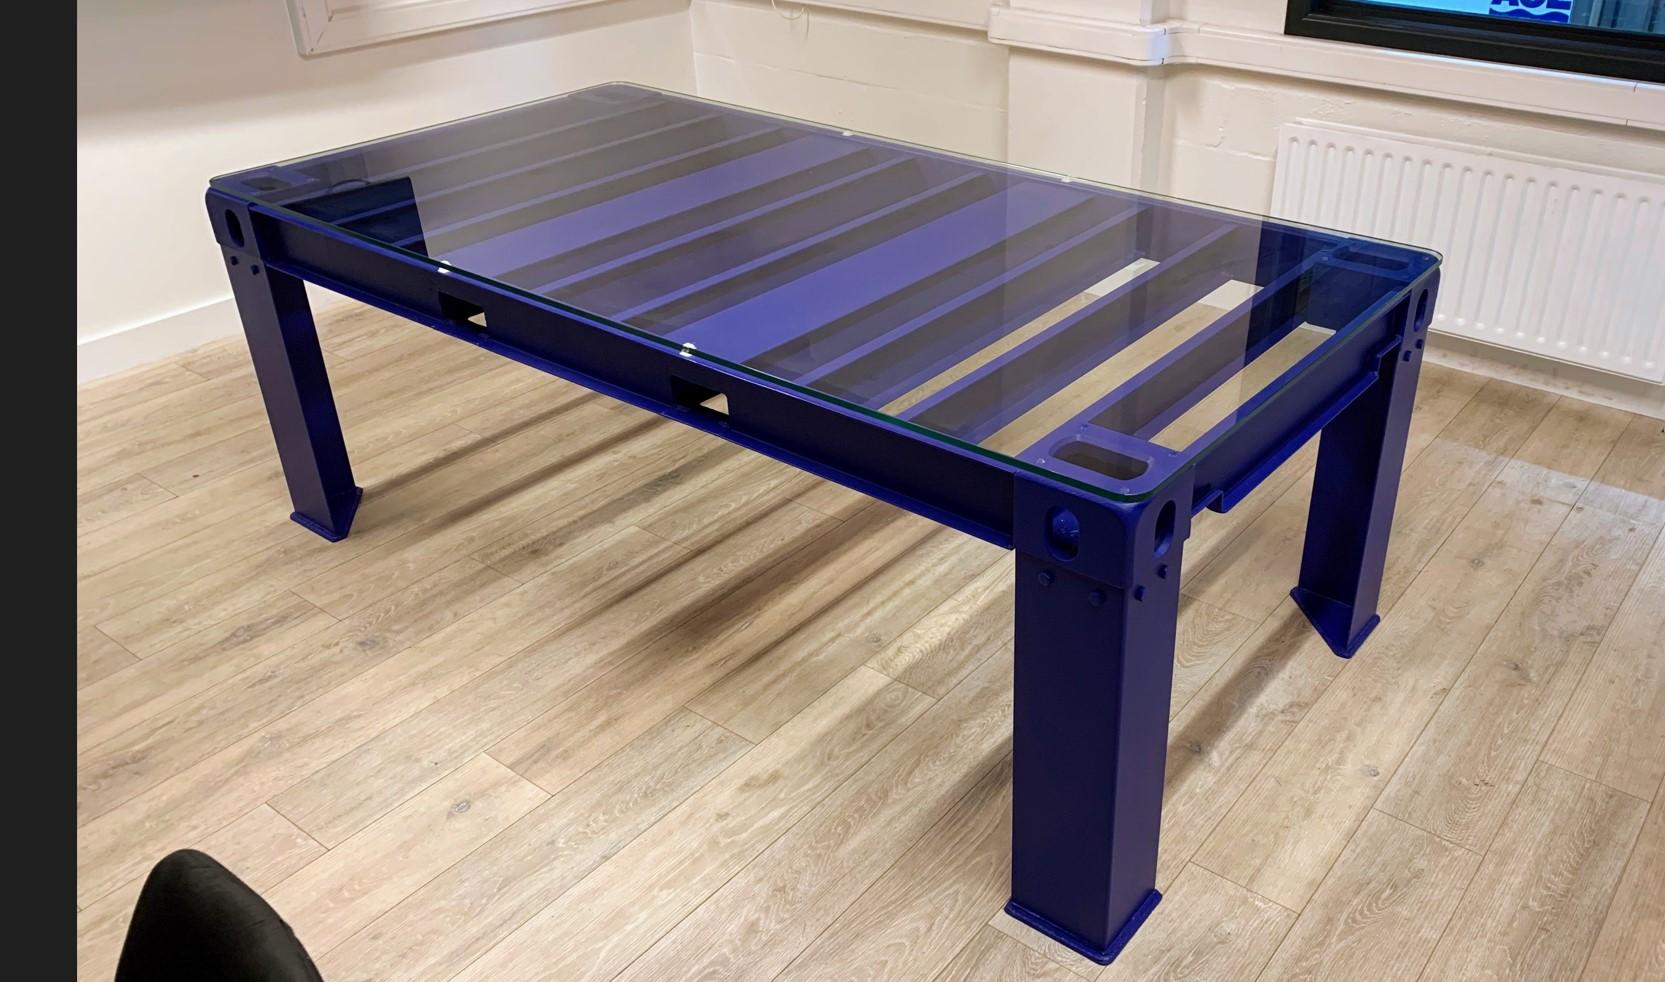 Custom table made from spare shipping container materials in dark blue with glass top and four legs in office room 